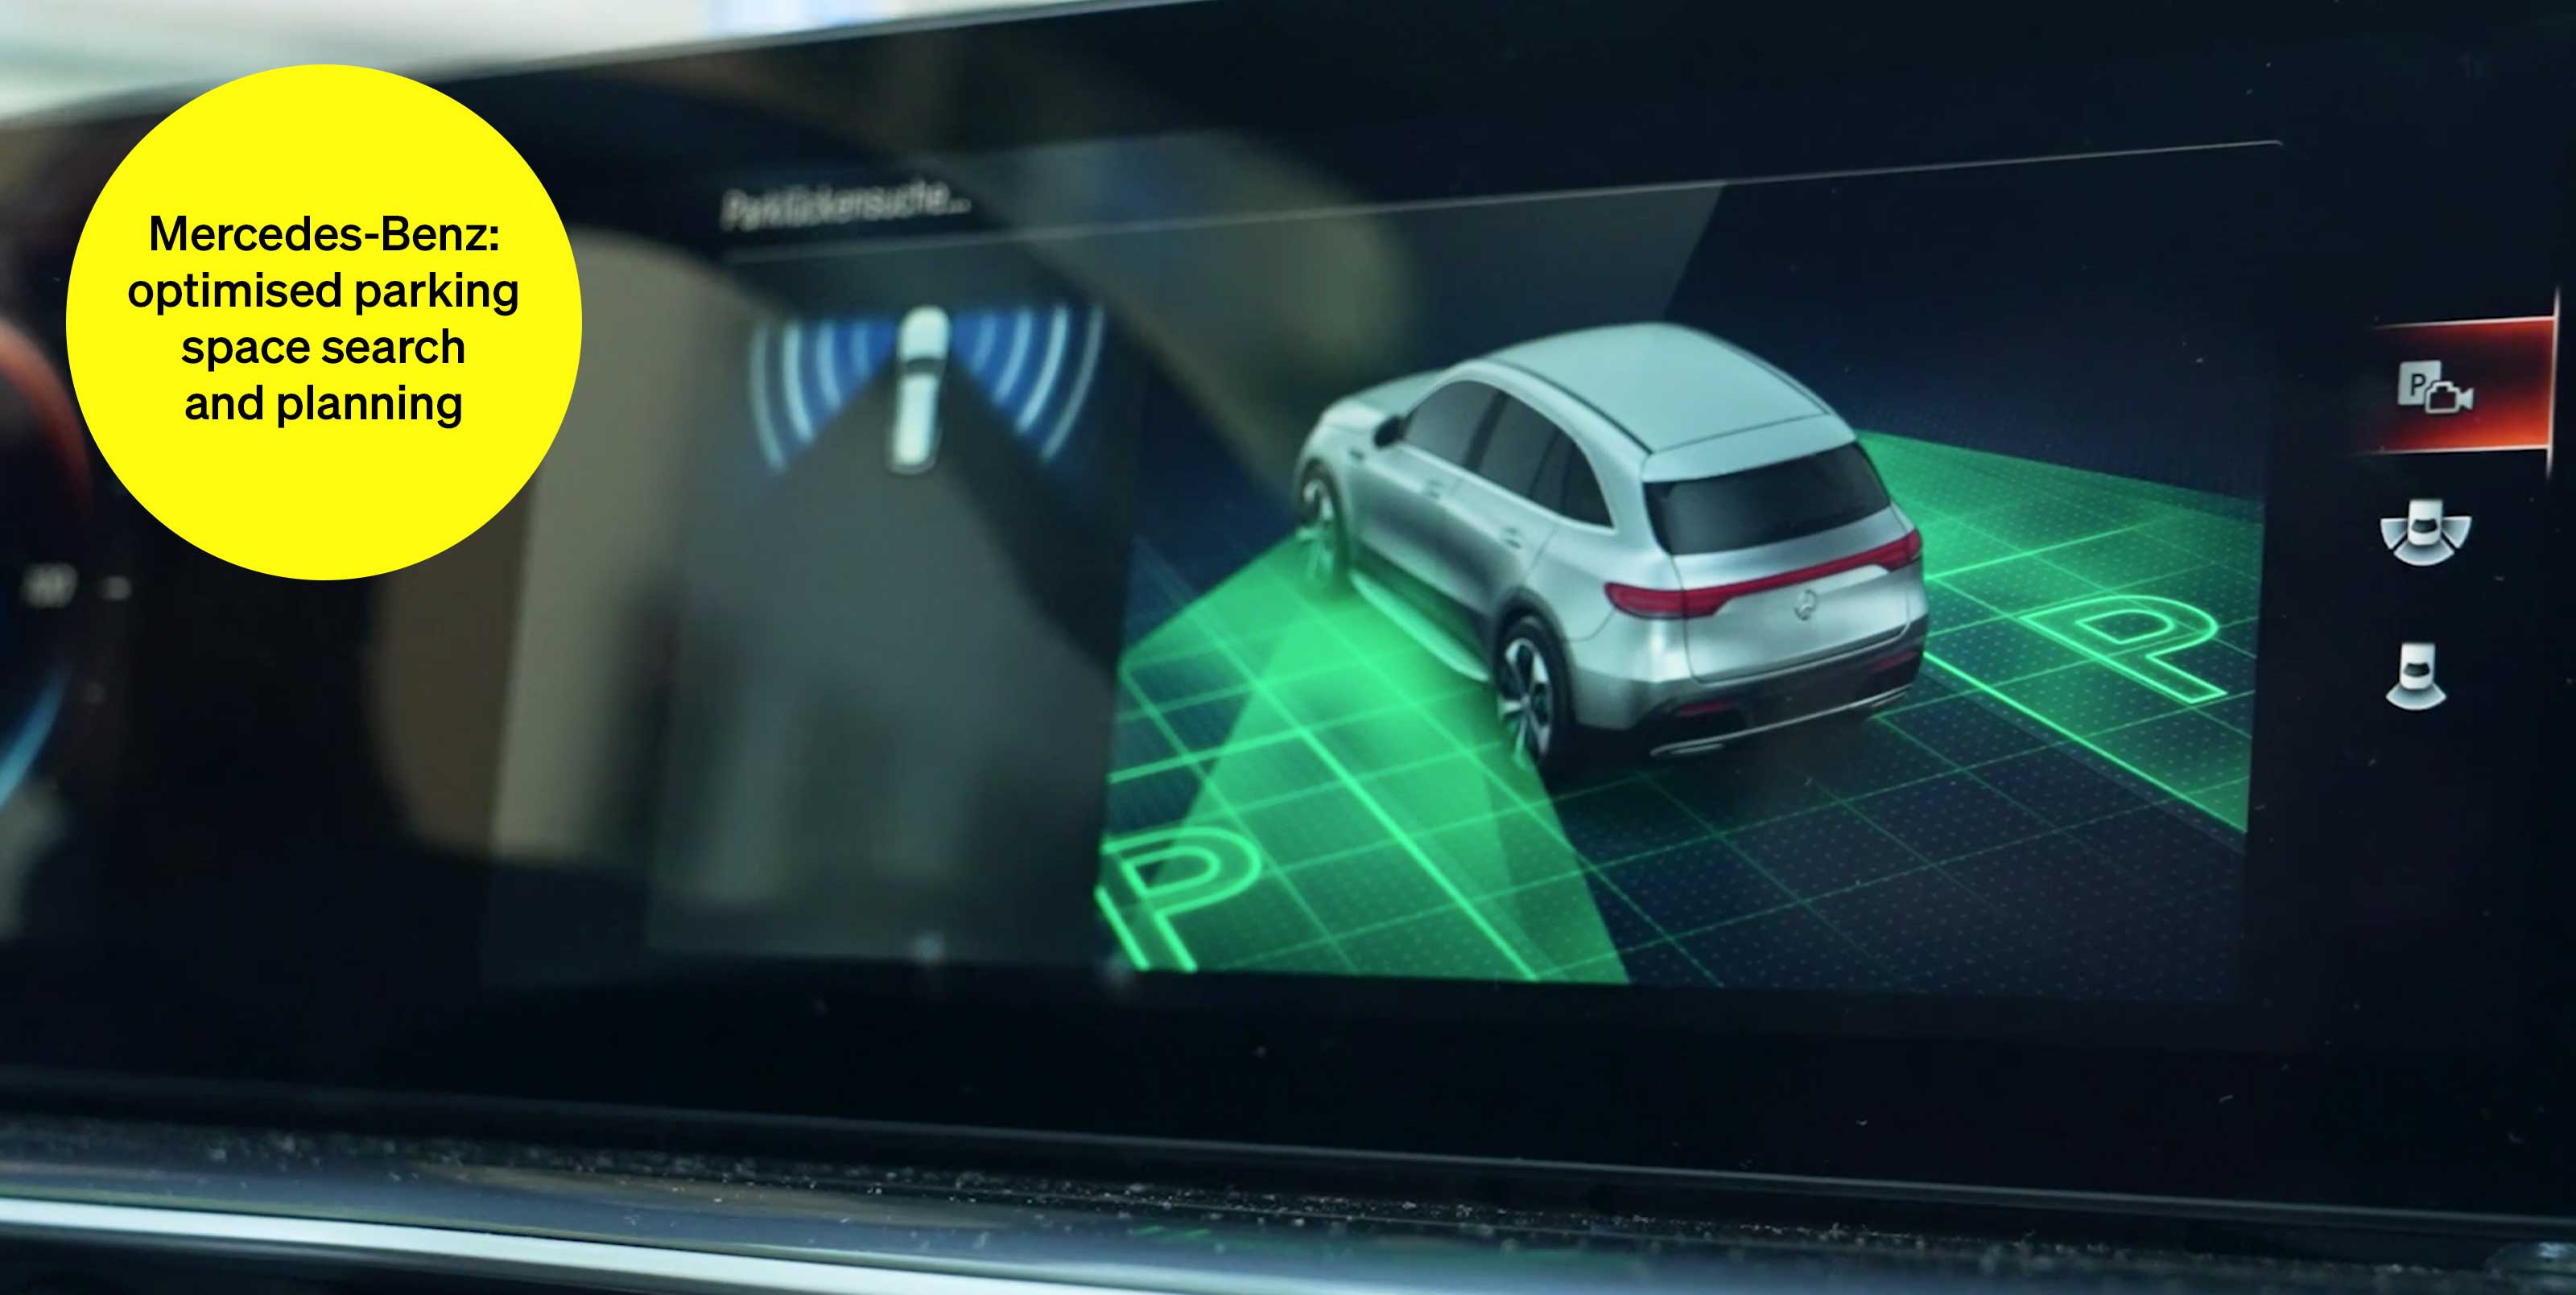 Parking sensor display in car - text module in round tile: Mercedes-Benz optimize parking space search & planning